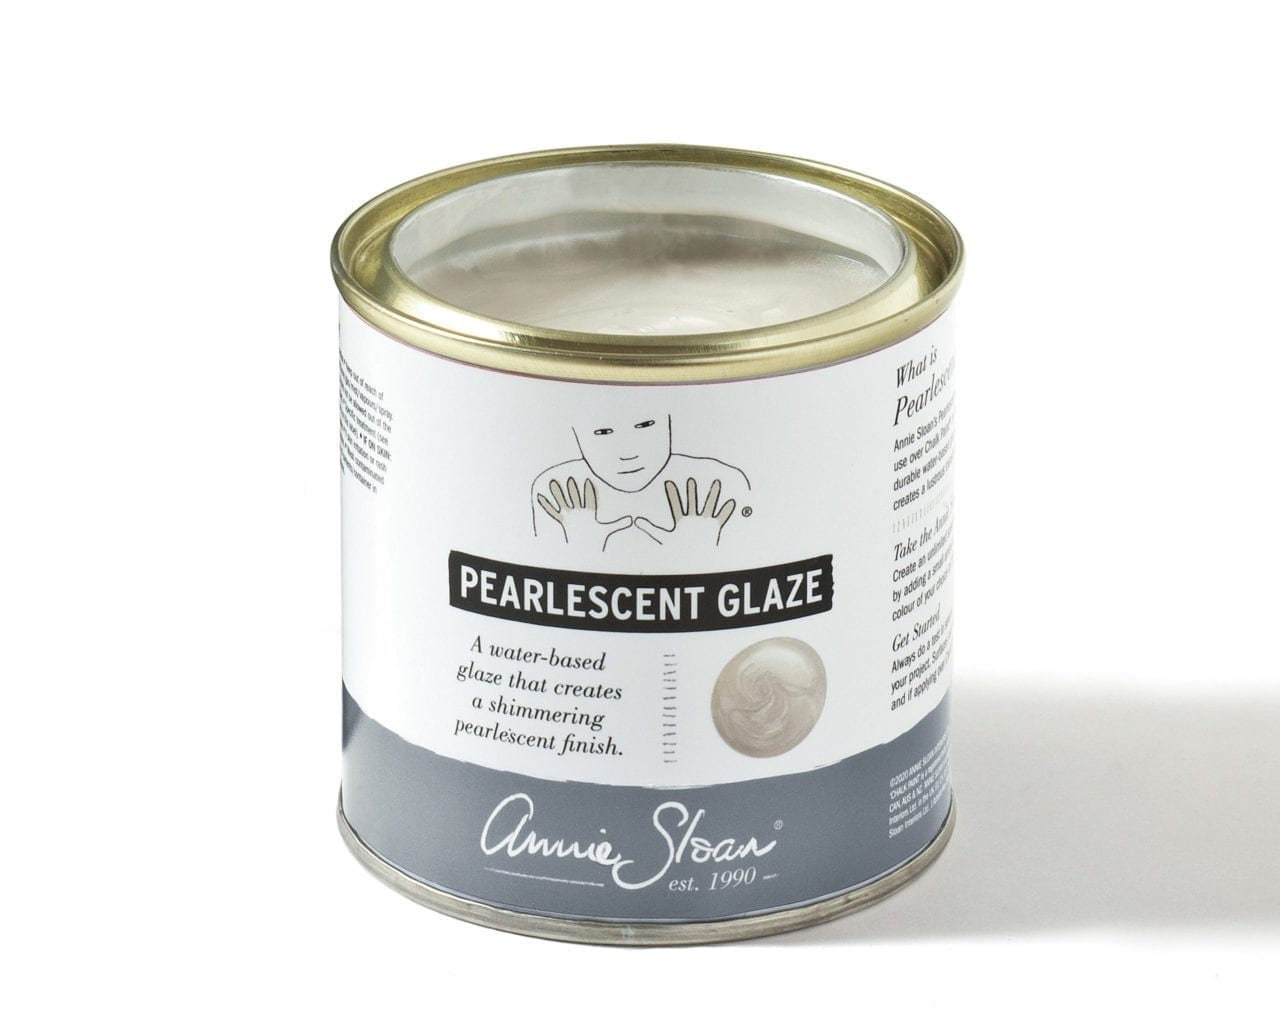 FLAT Brush Small No. 30 (1.25in) ~-Annie Sloan Chalk Paint®